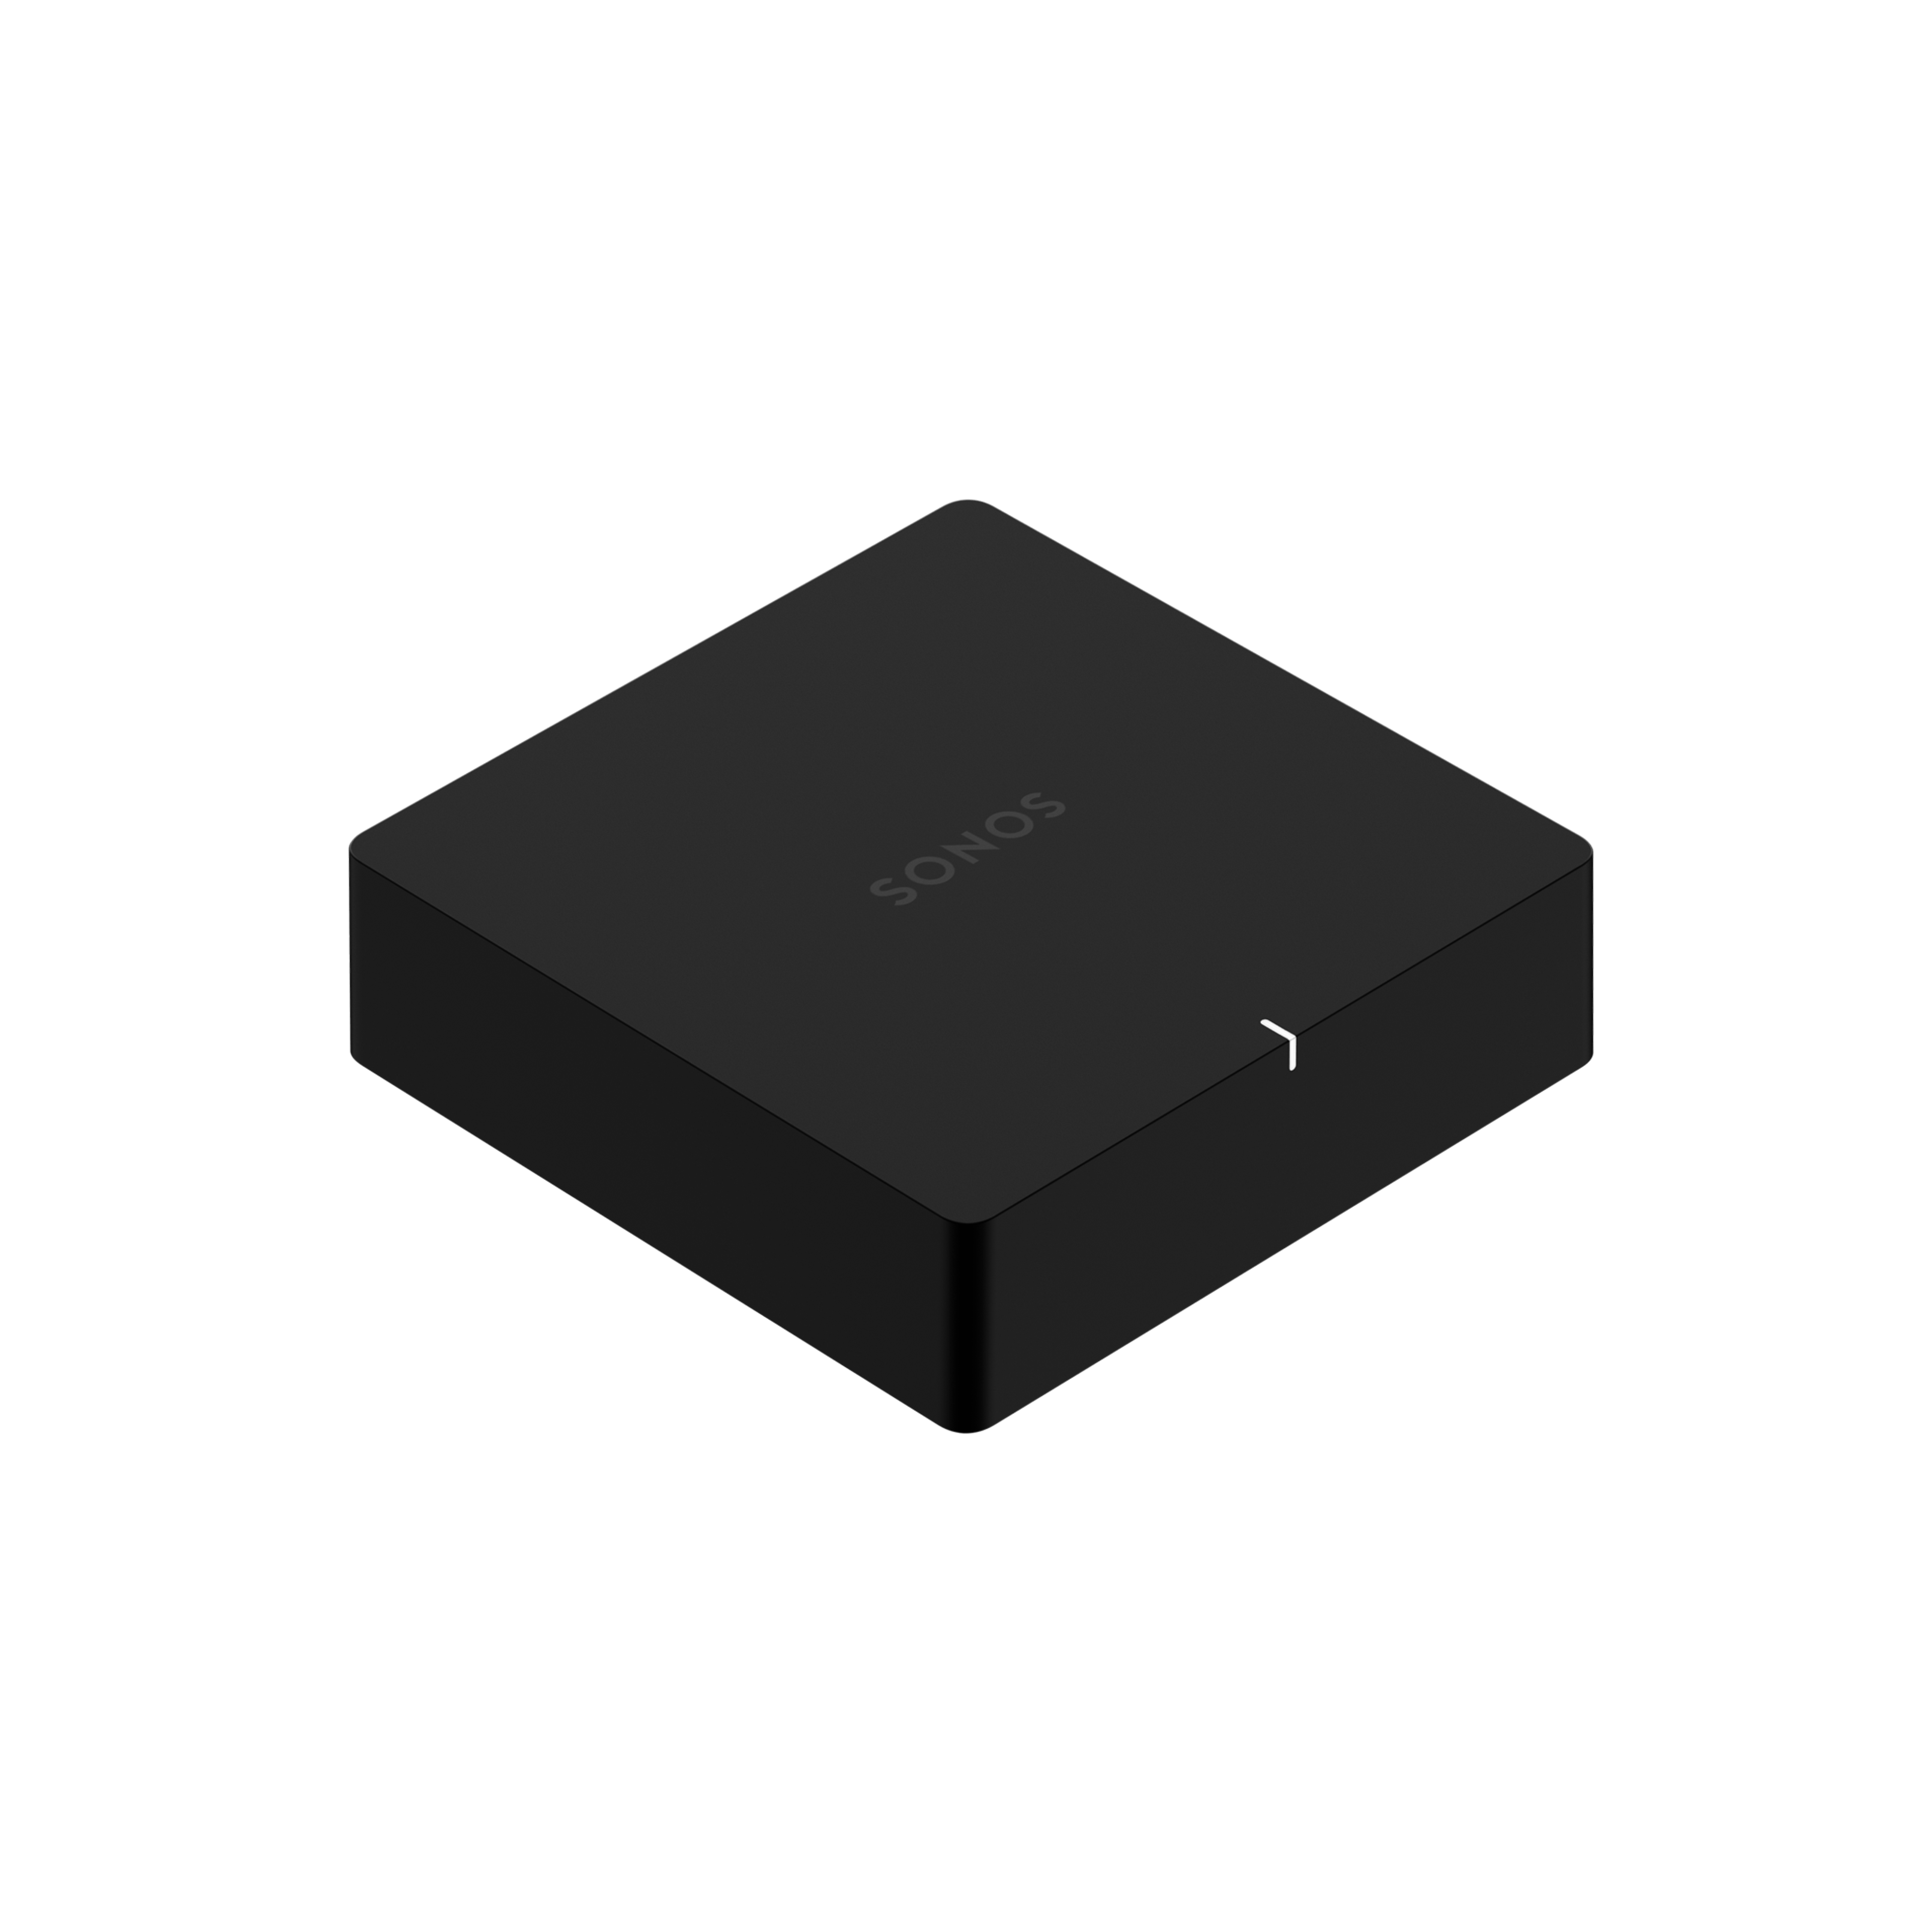 Image of a Sonos Port turned at an angle